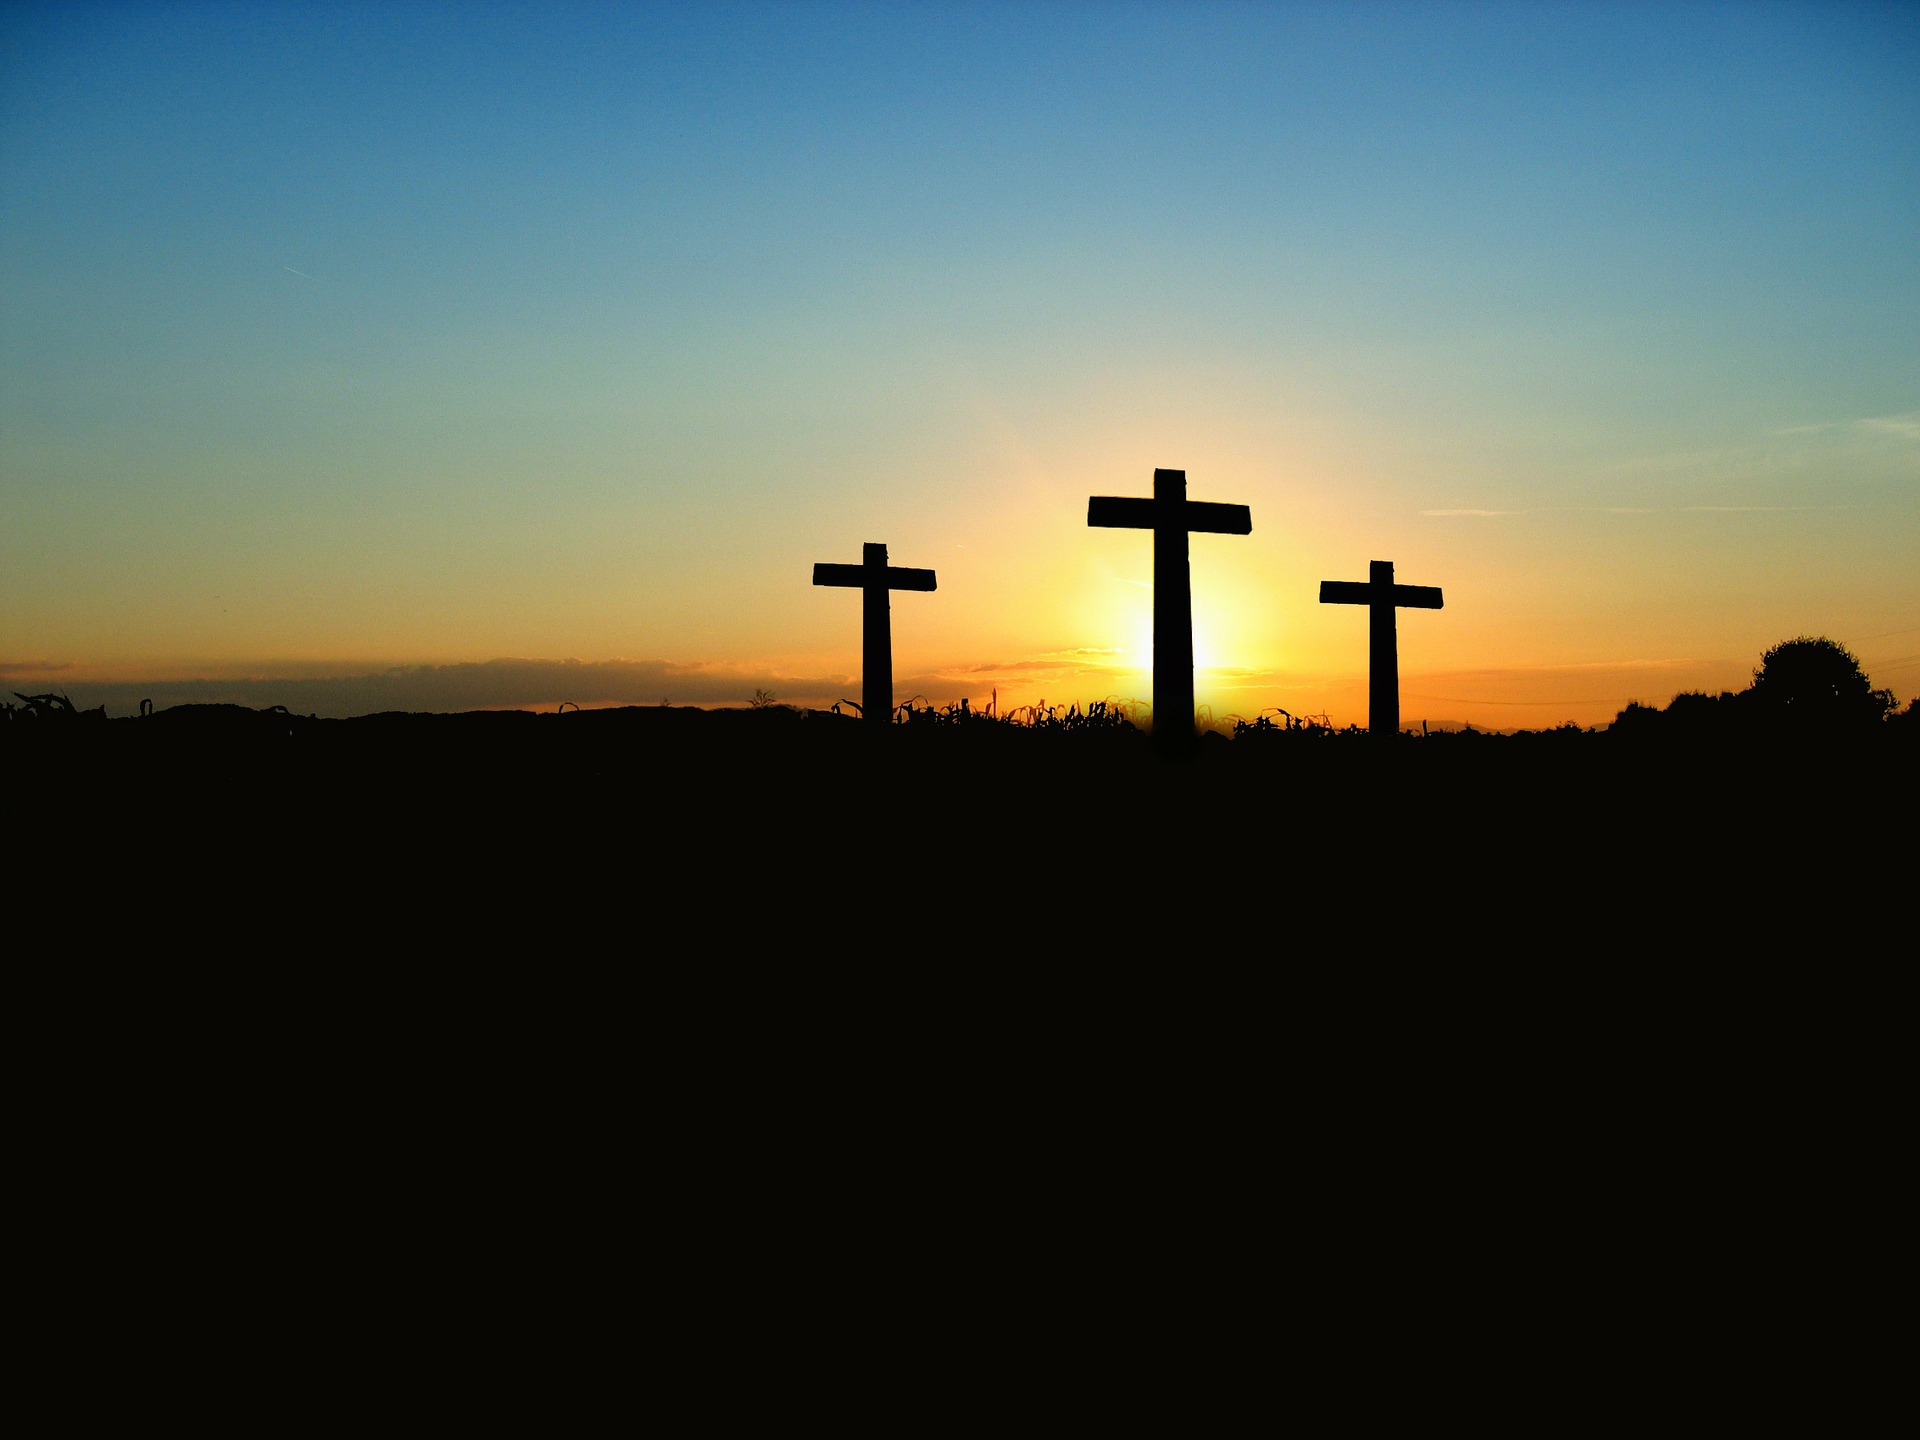 Sunrise and crosses by Gerd Altmann from Pixabay